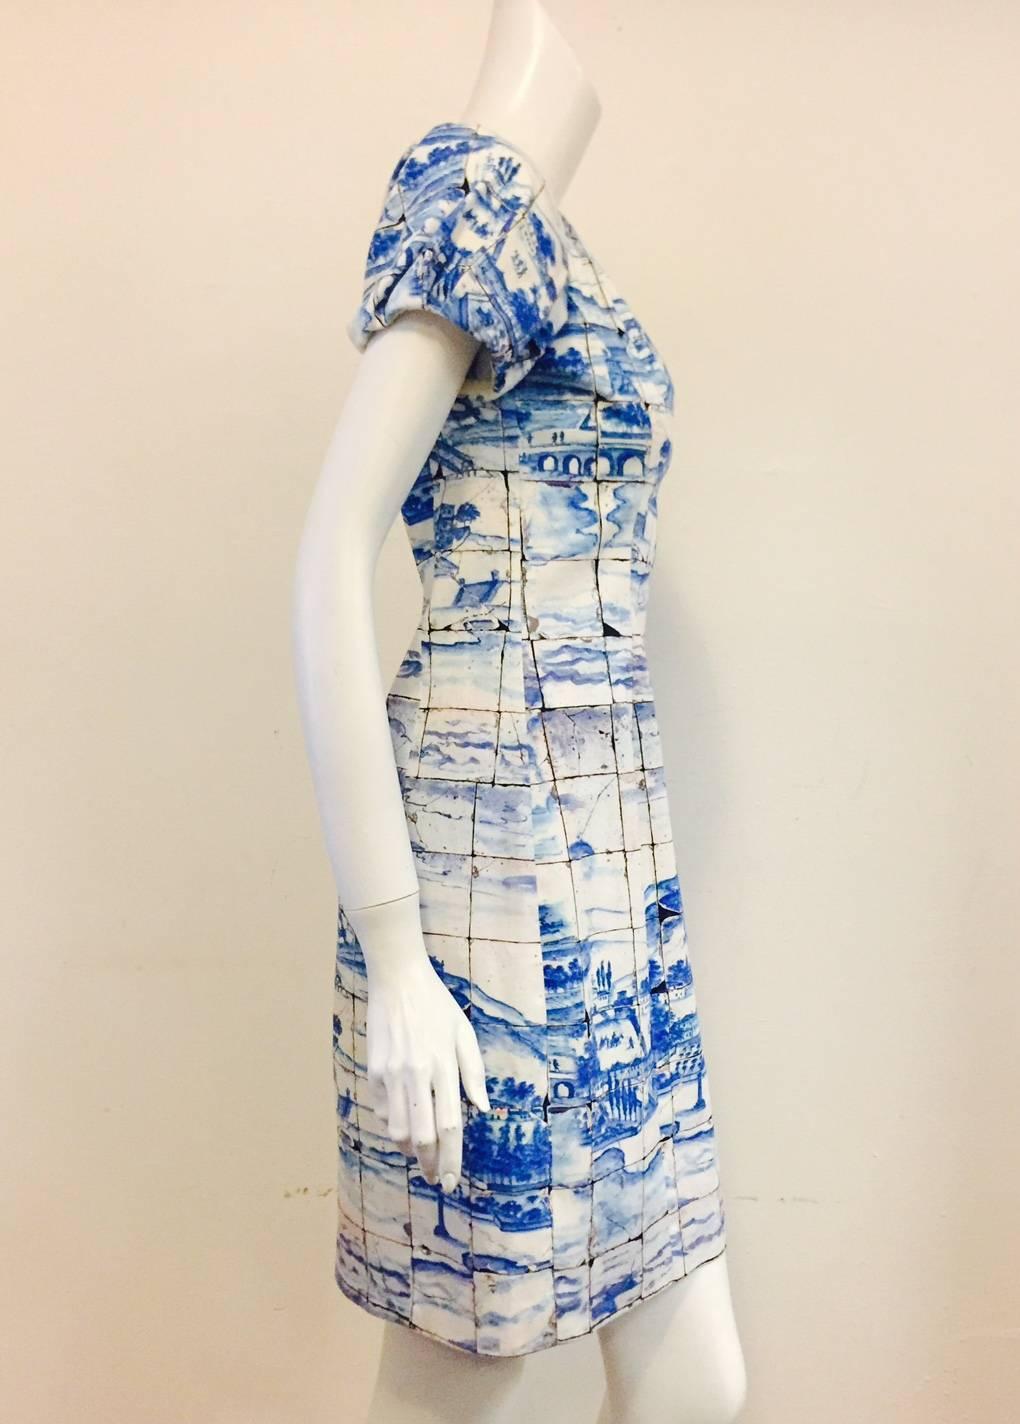 Prada cotton dress features a mosaic print of blue and white 